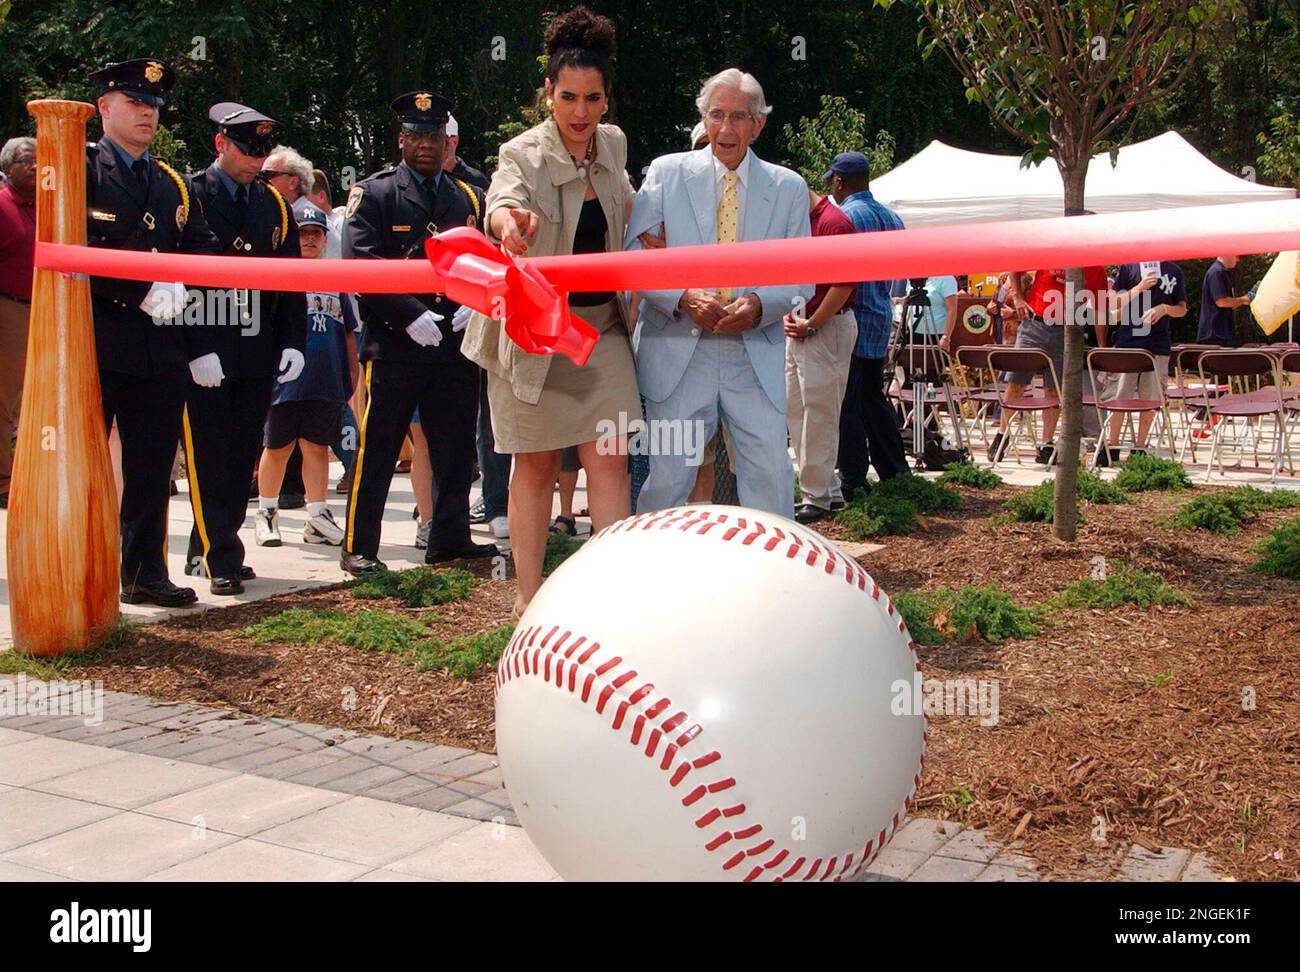 New York Yankees Hall of Fame shortstop Phil Rizzuto, center, is